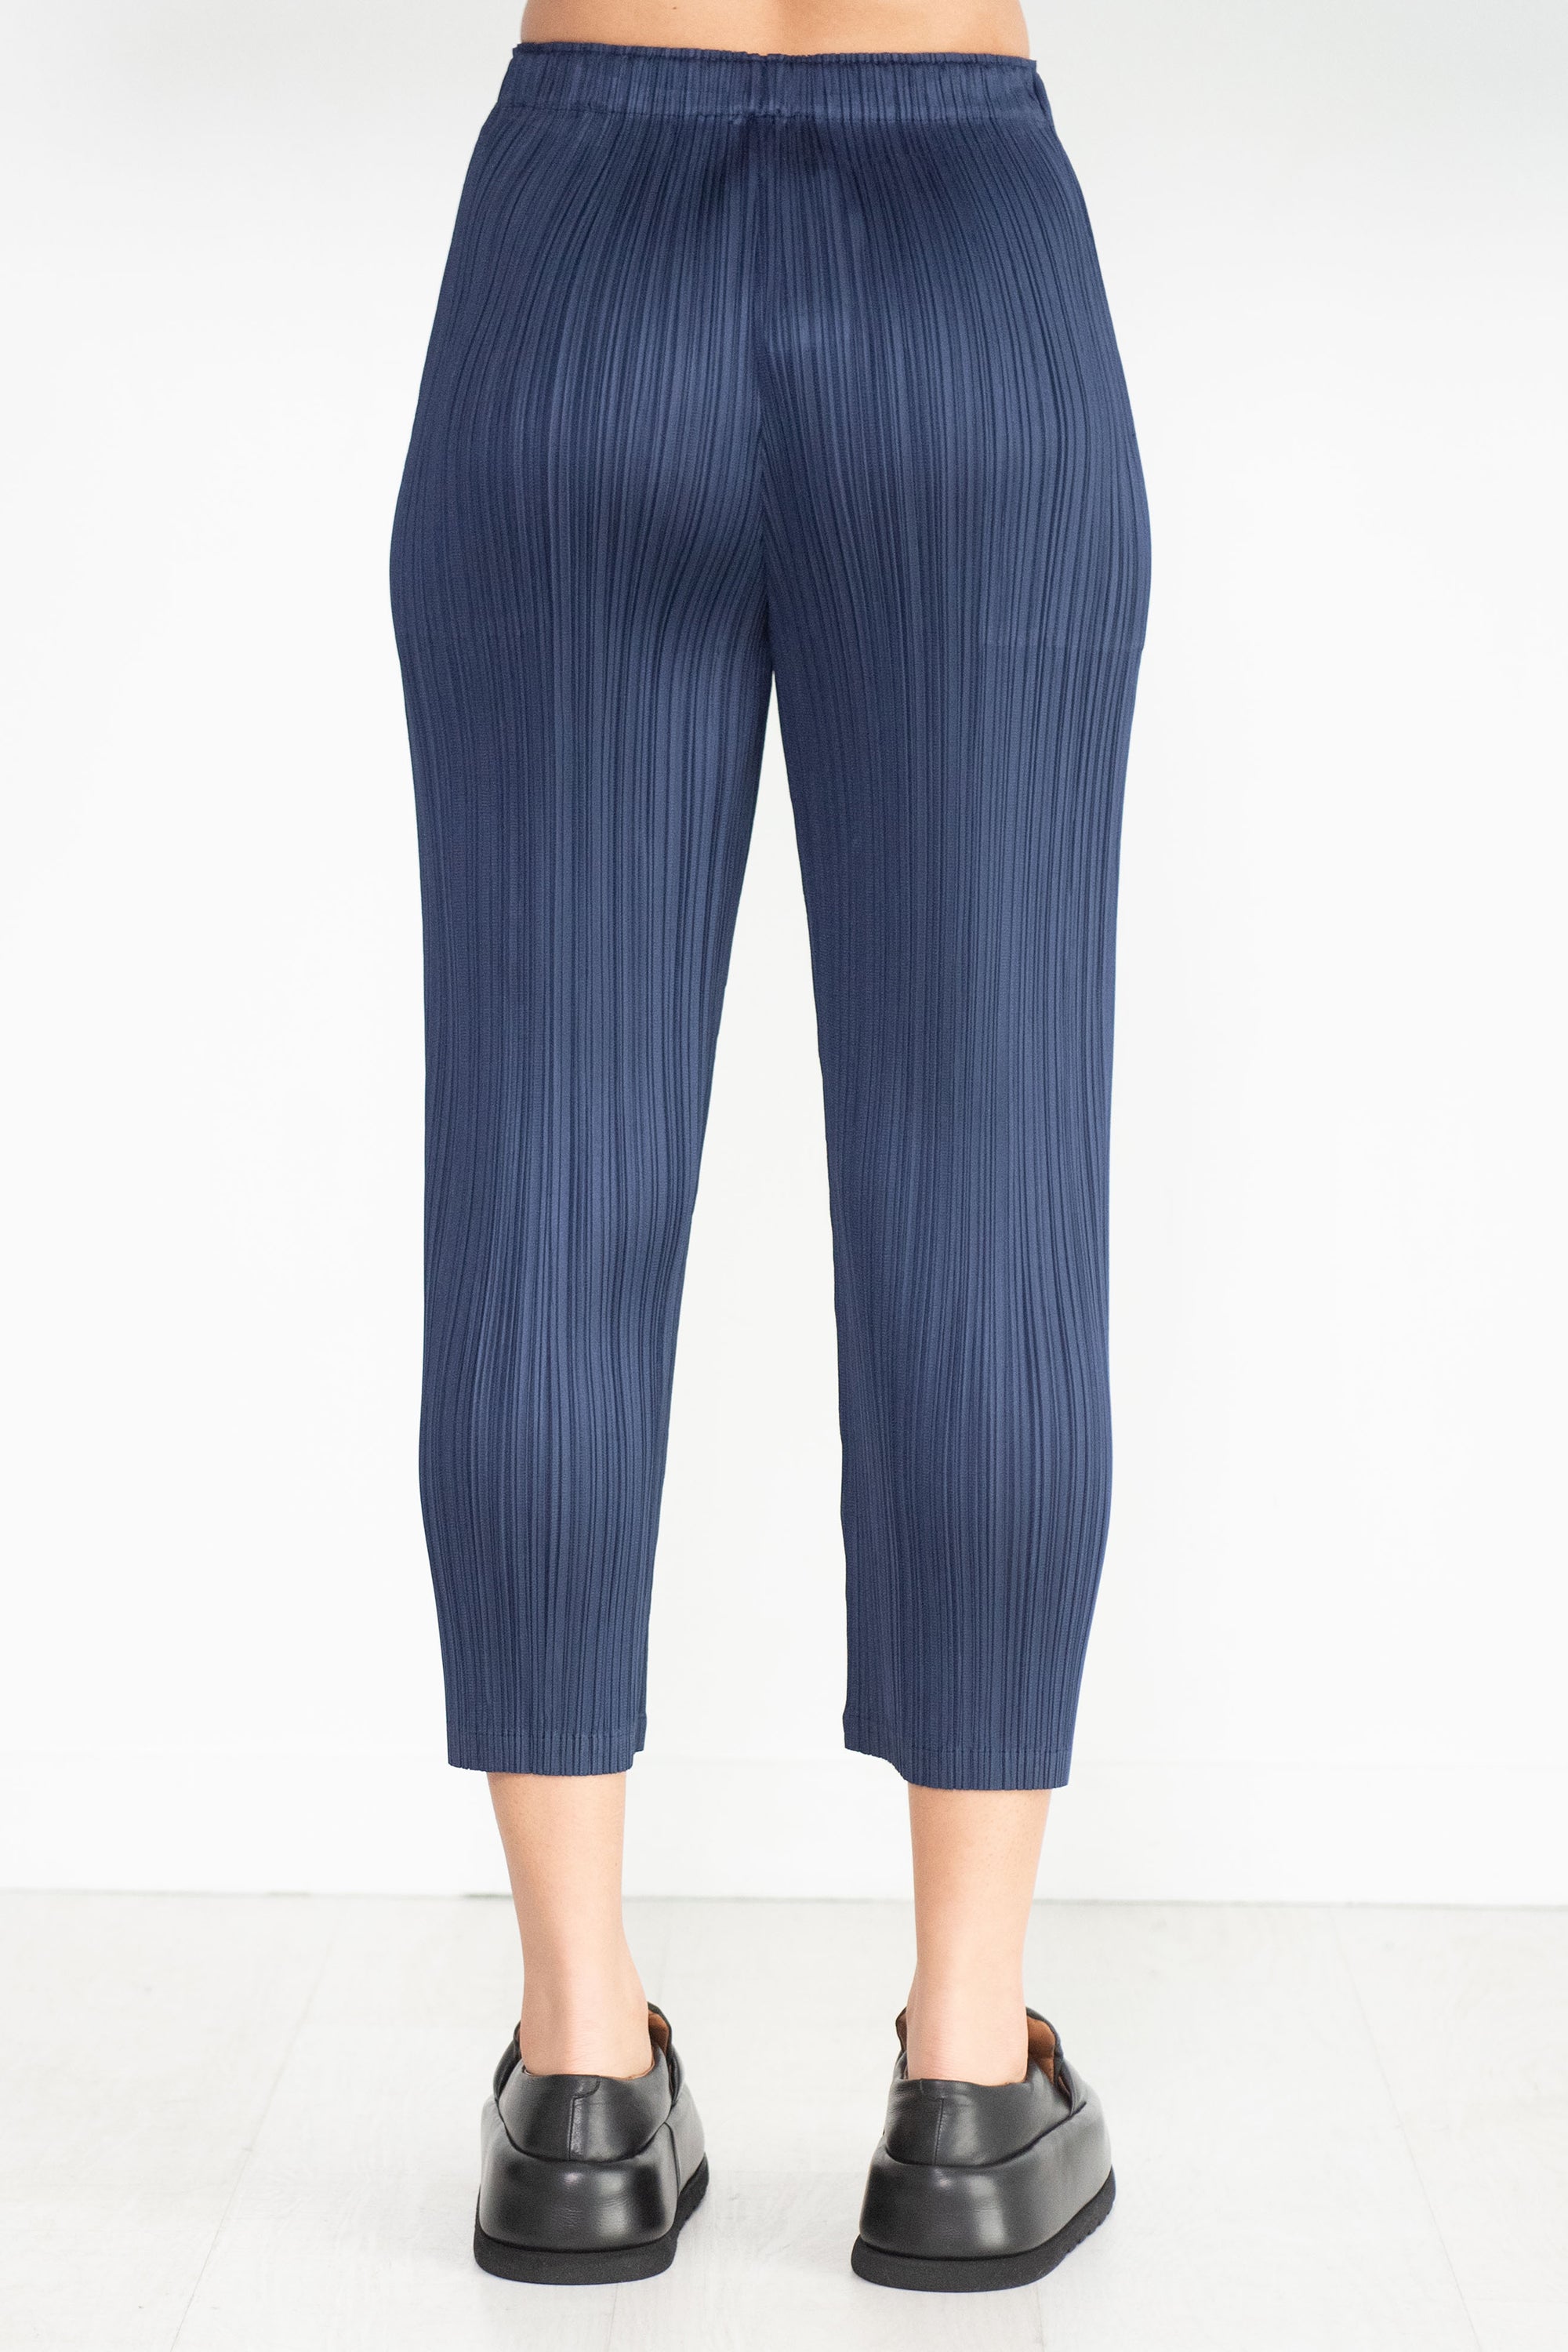 Issey Miyake - Pleats Please - Fluffy Pleated Crop Pants, Women's Fashion,  Bottoms, Other Bottoms on Carousell